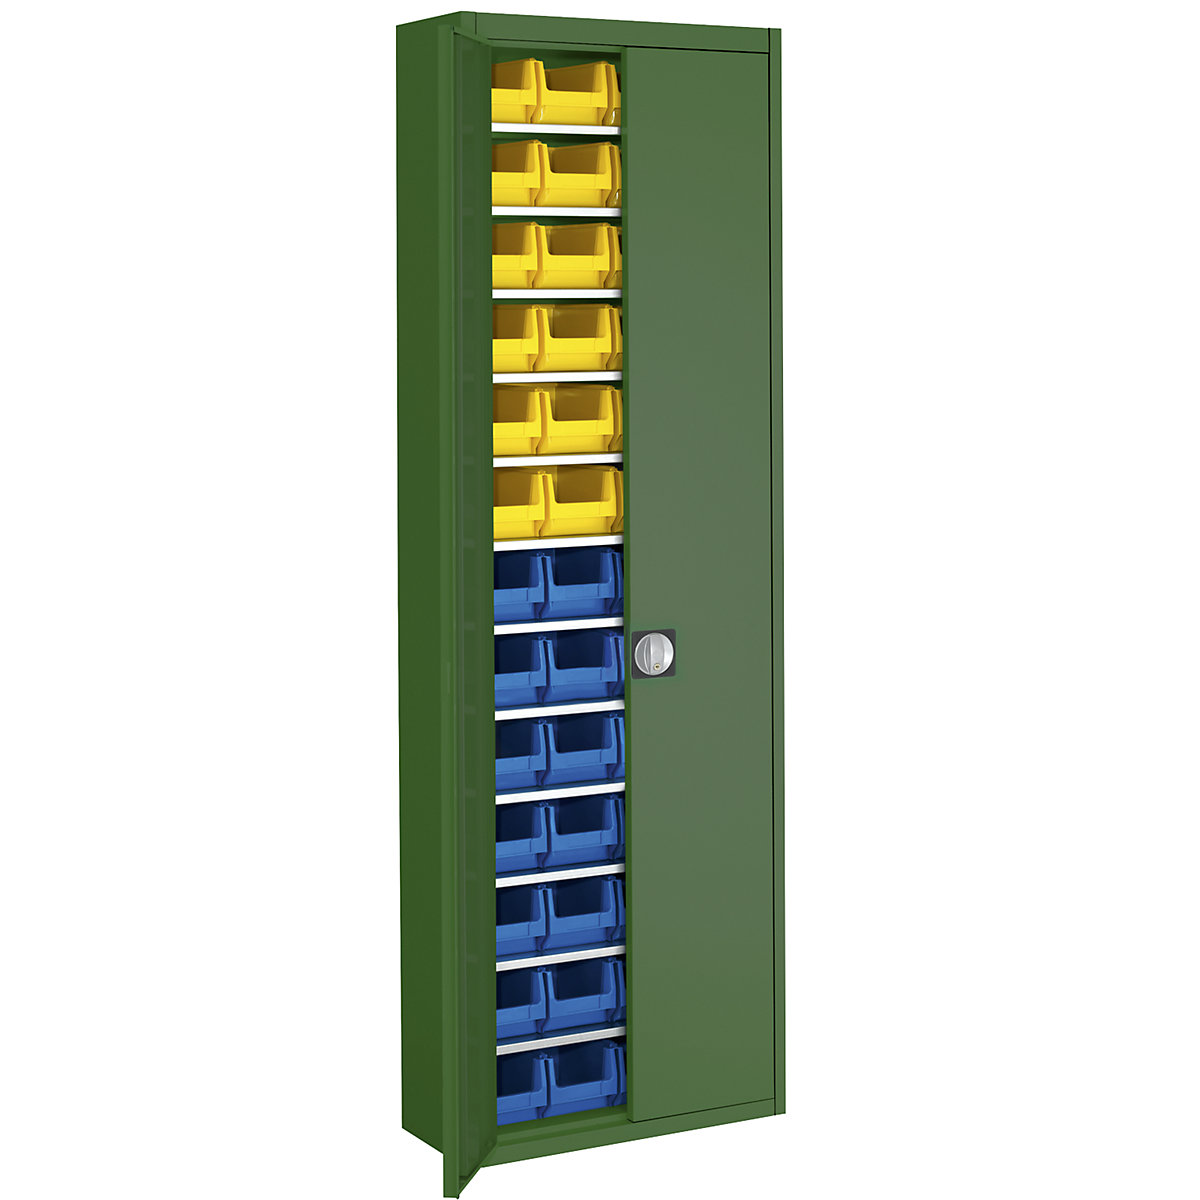 Storage cupboard with open fronted storage bins – mauser, HxWxD 2150 x 680 x 280 mm, single colour, green, 52 bins-5